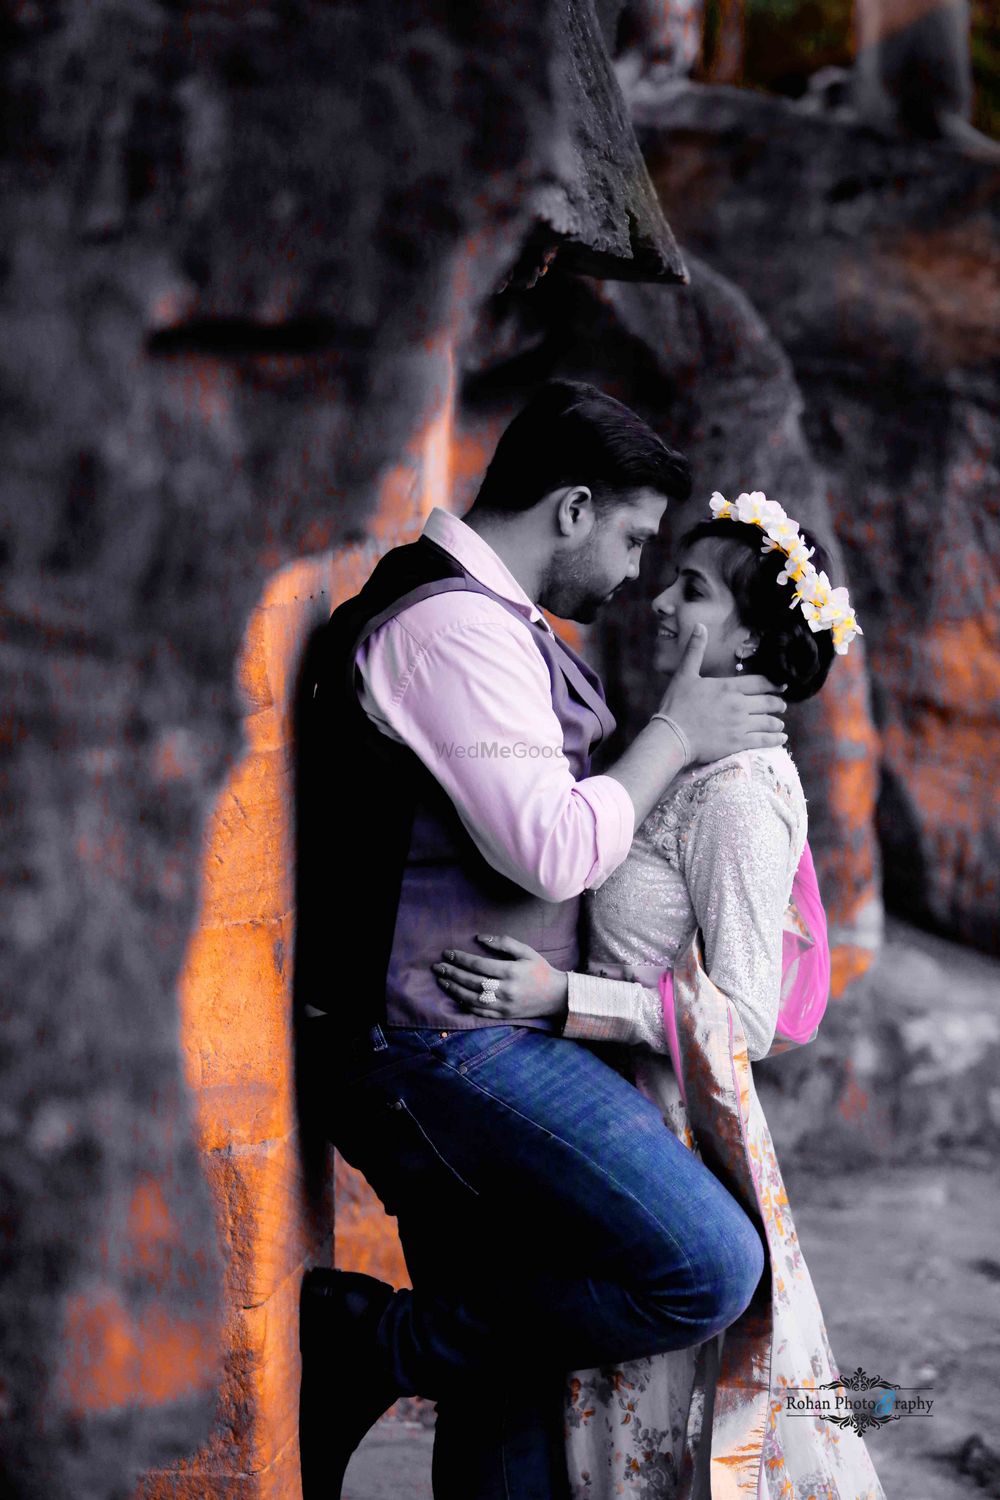 Photo From pre wedding shoot - By Rohan Photography